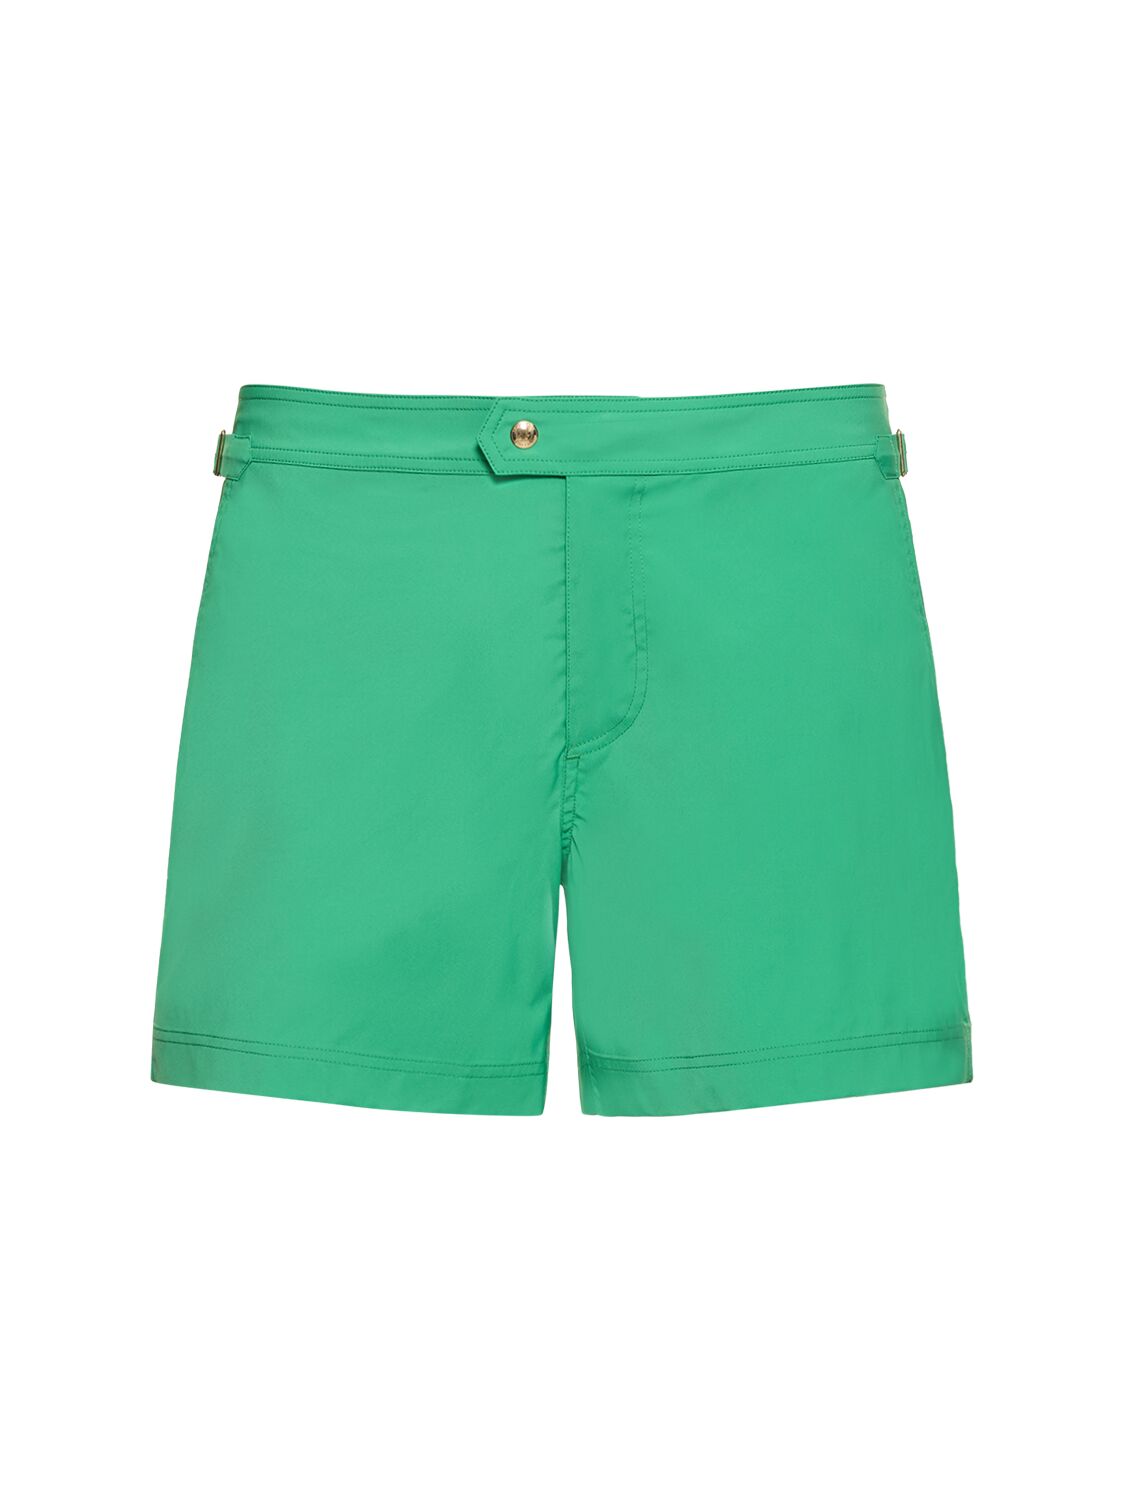 Tom Ford Compact Poplin Swim Shorts W/ Piping In Green